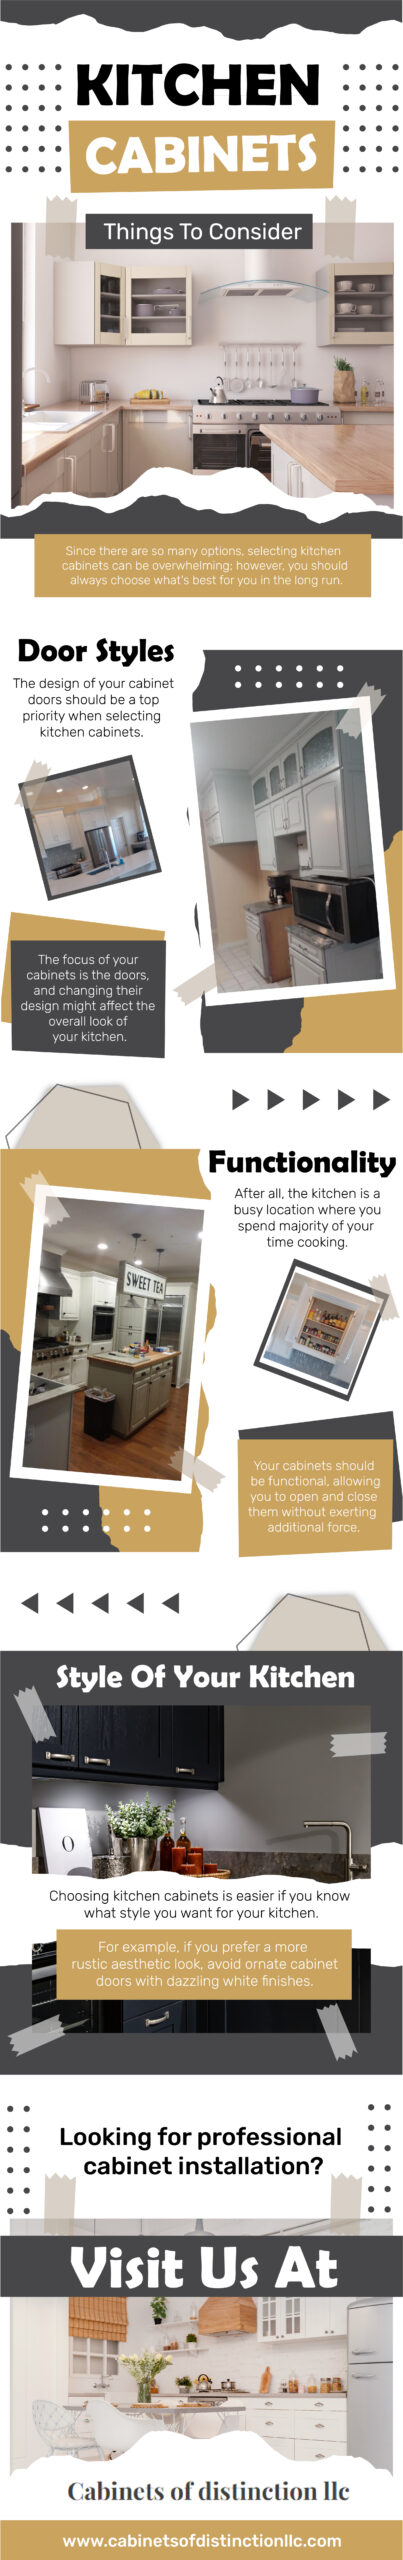 Kitchen Cabinet Things to Consider